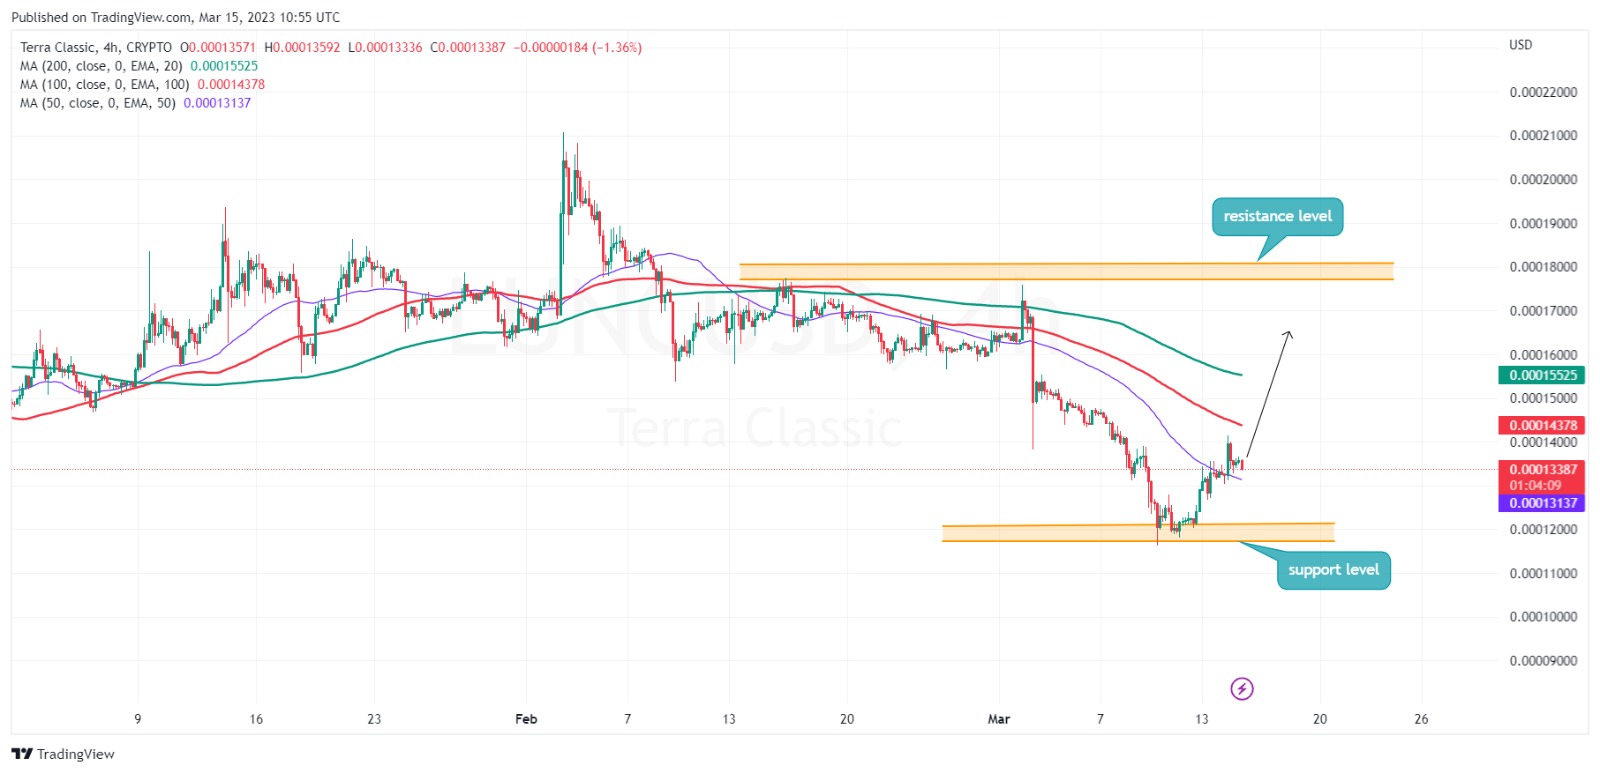 Lunc price prediction according to trading view on 3/15/2023